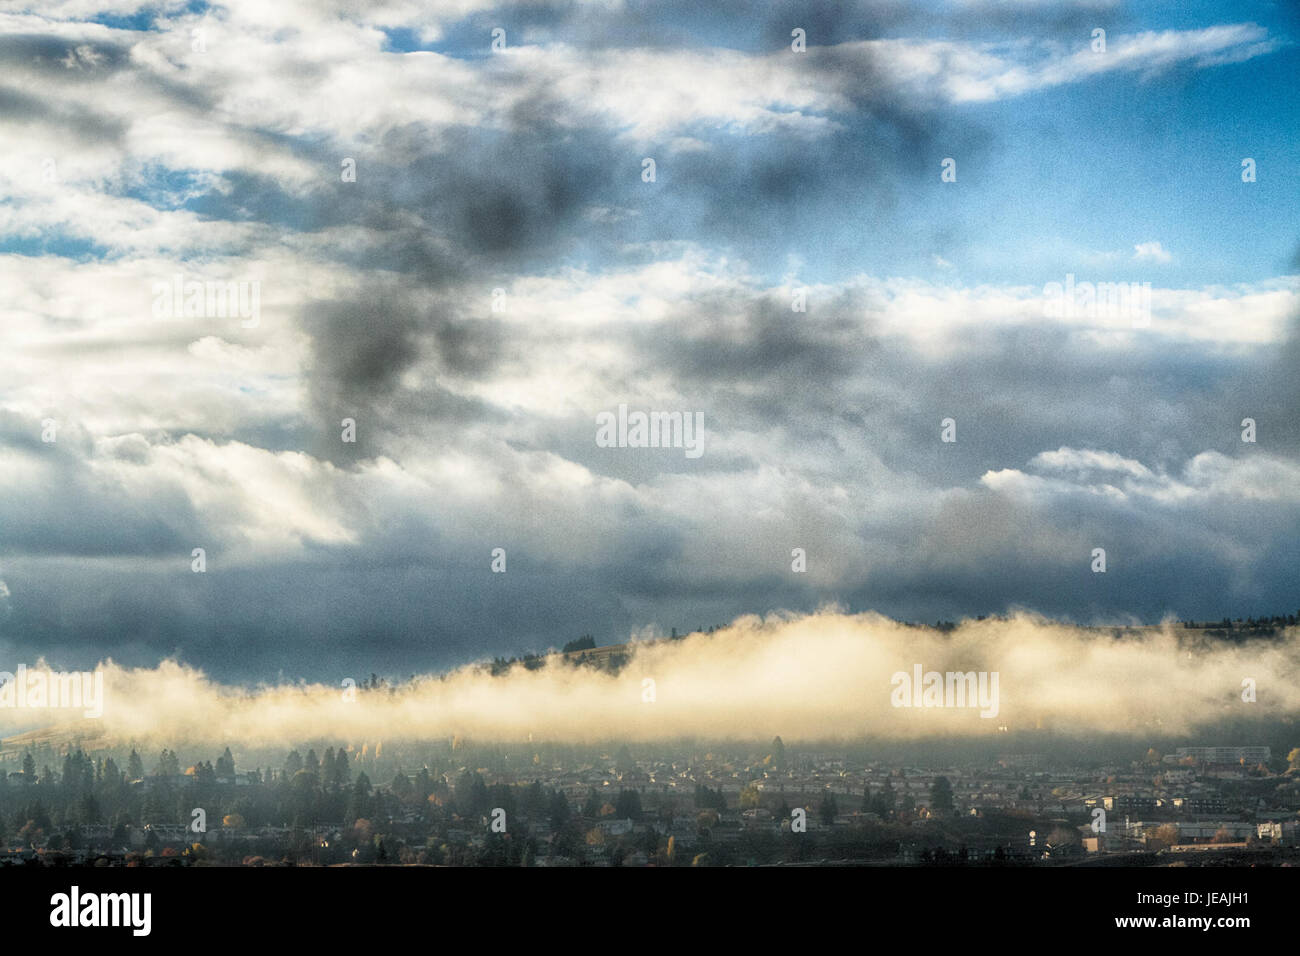 2014-365-308 City Clouds (15529300019) Stock Photo